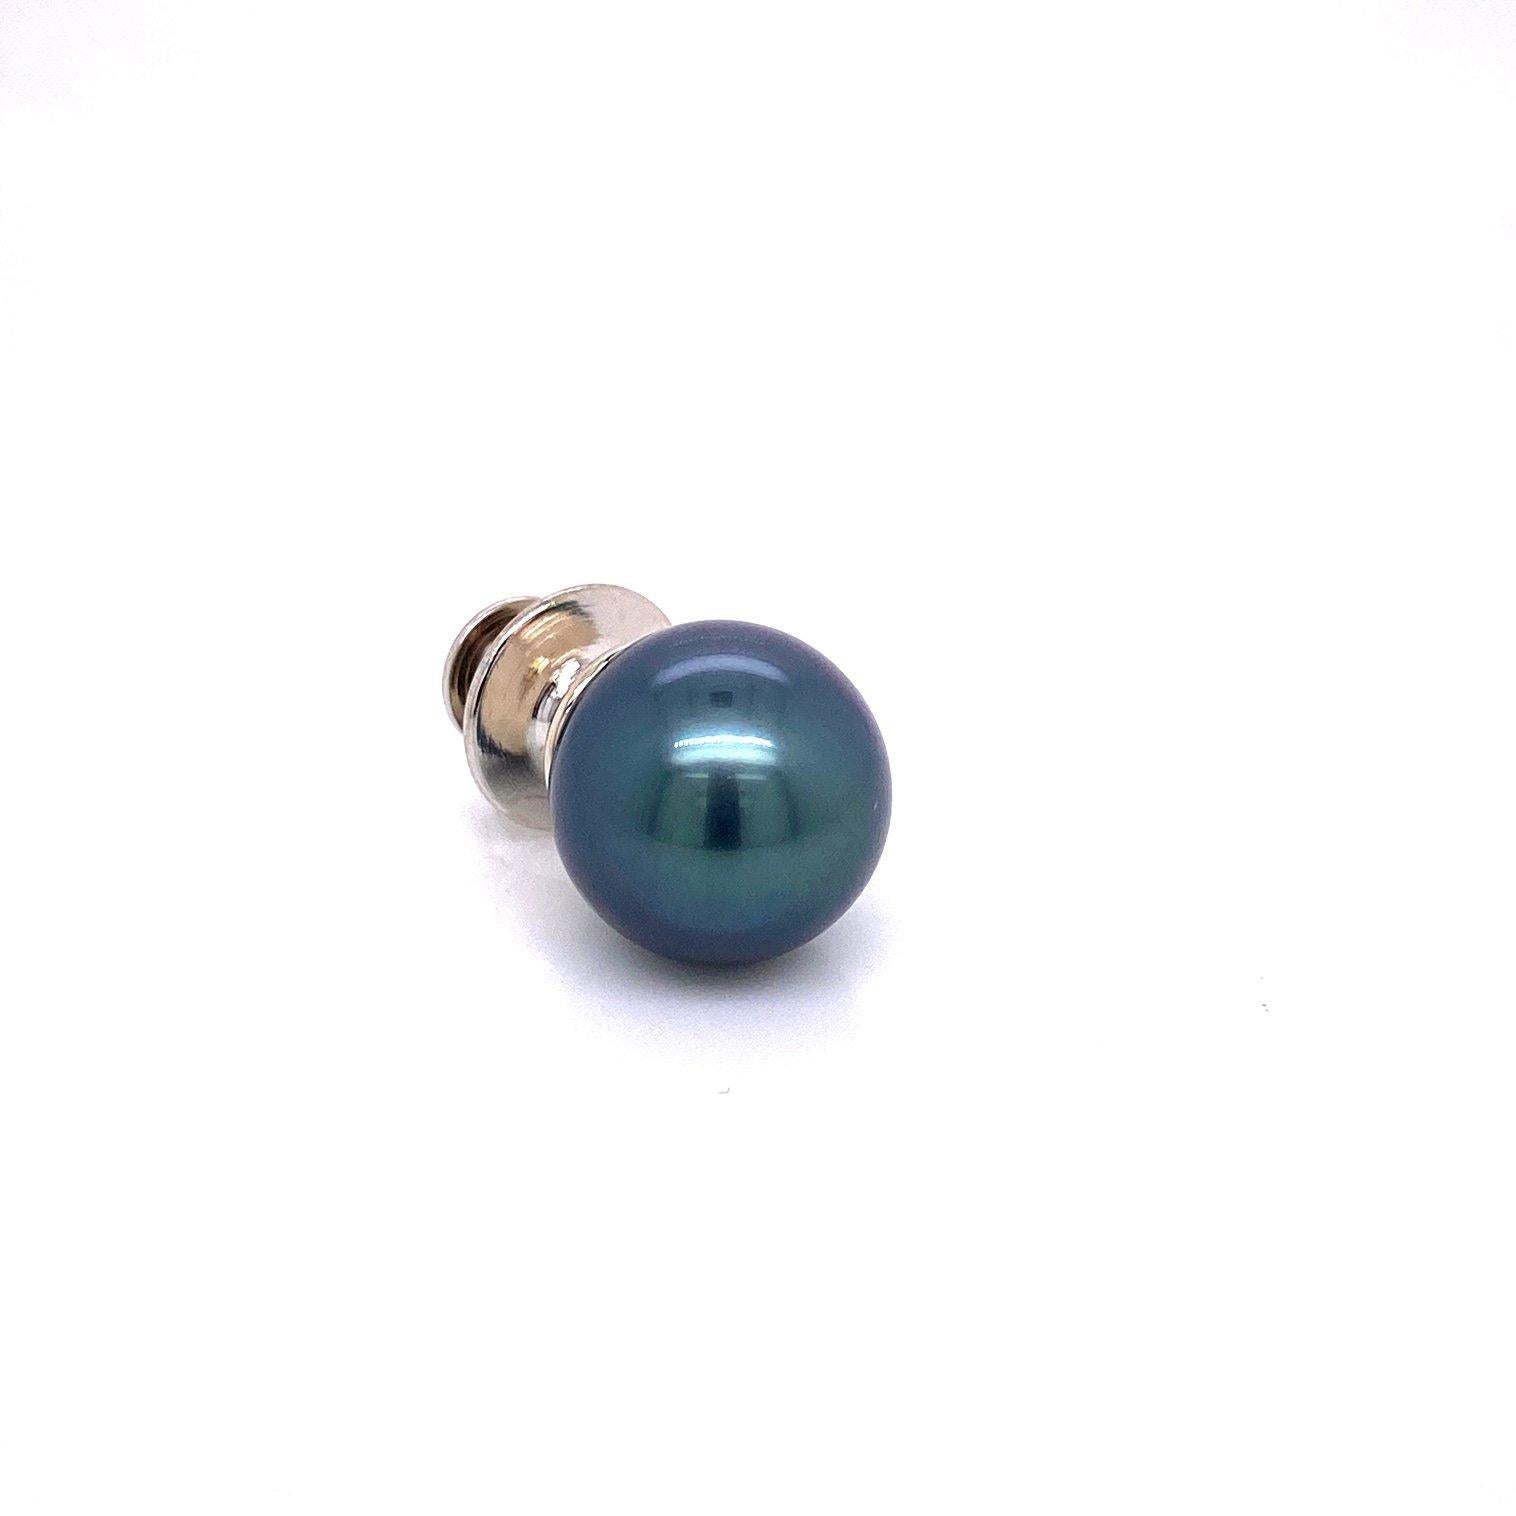 A Tahitian pearl lapel pin/tie tack in 18k white gold with plated clutch. Designed and made by llyn strong.